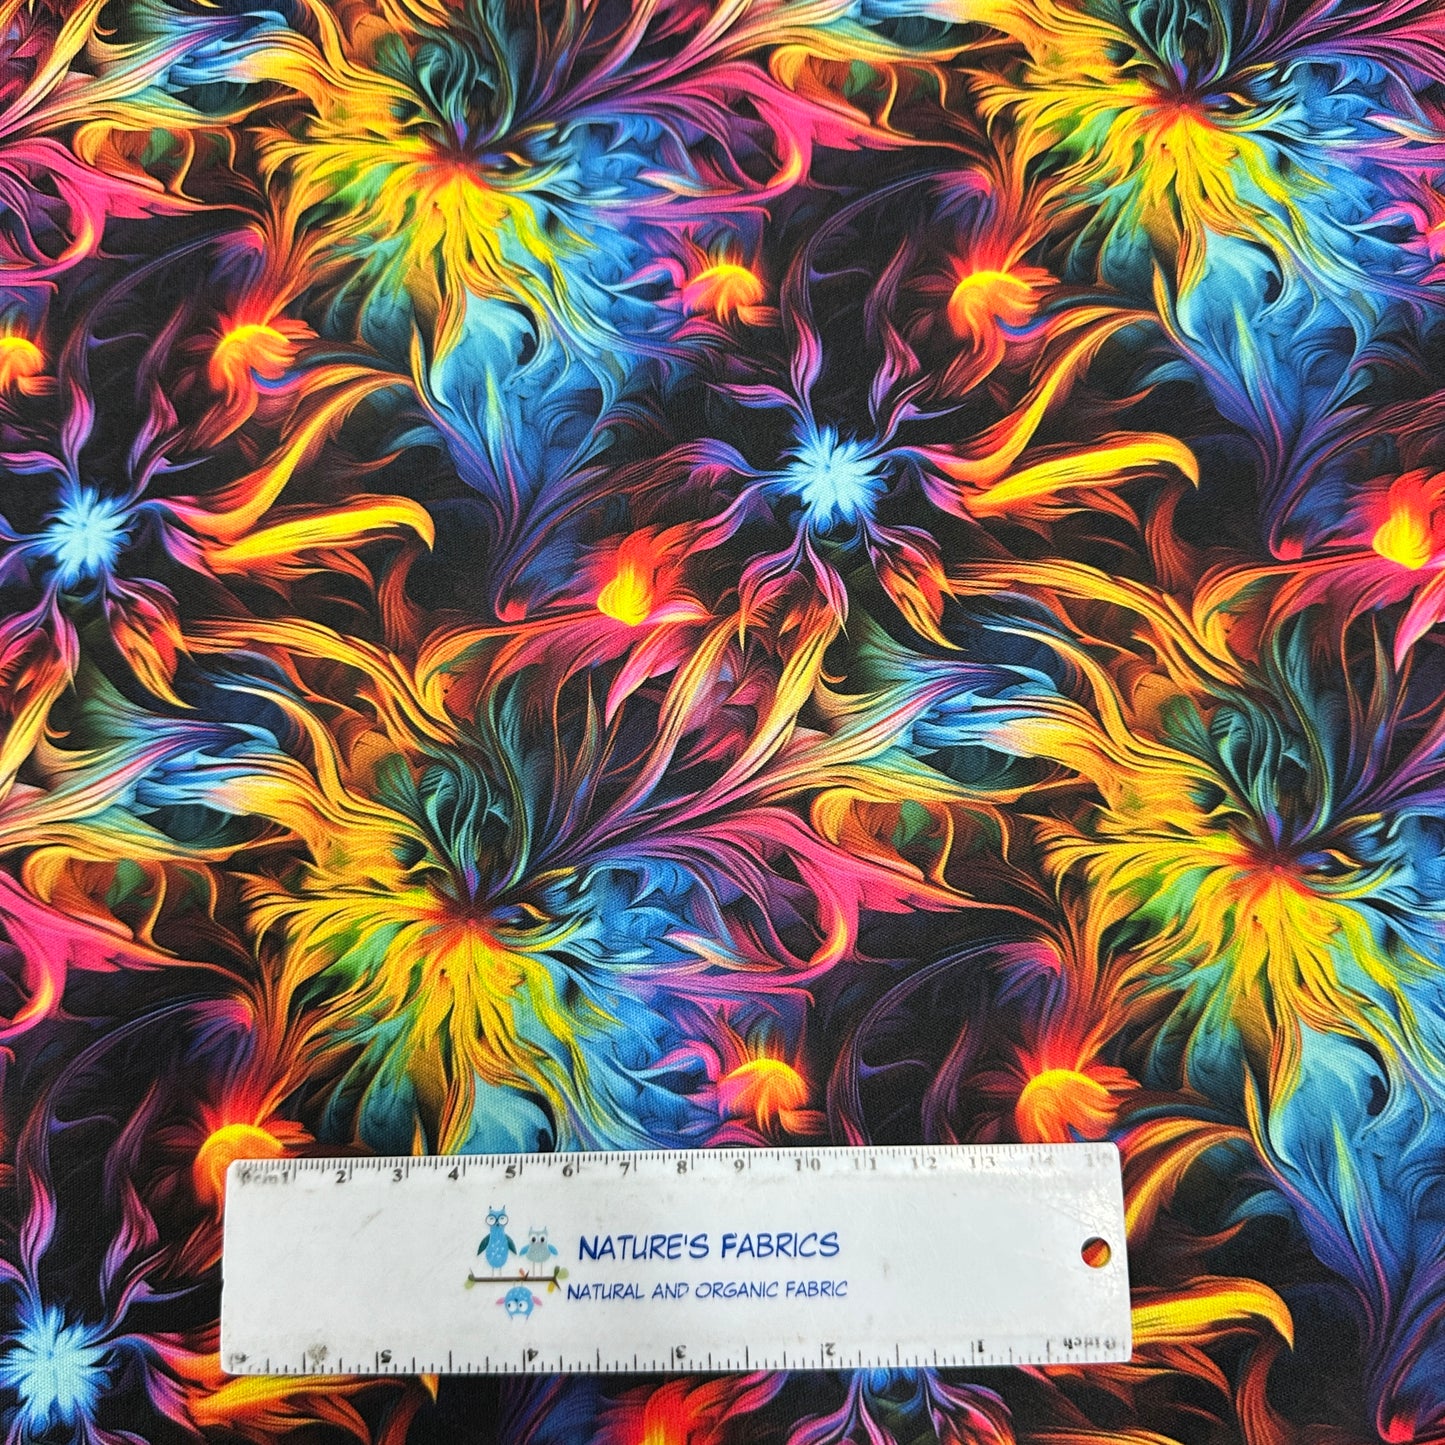 Psychedelic Brush Strokes 1 mil PUL Fabric - Made in the USA